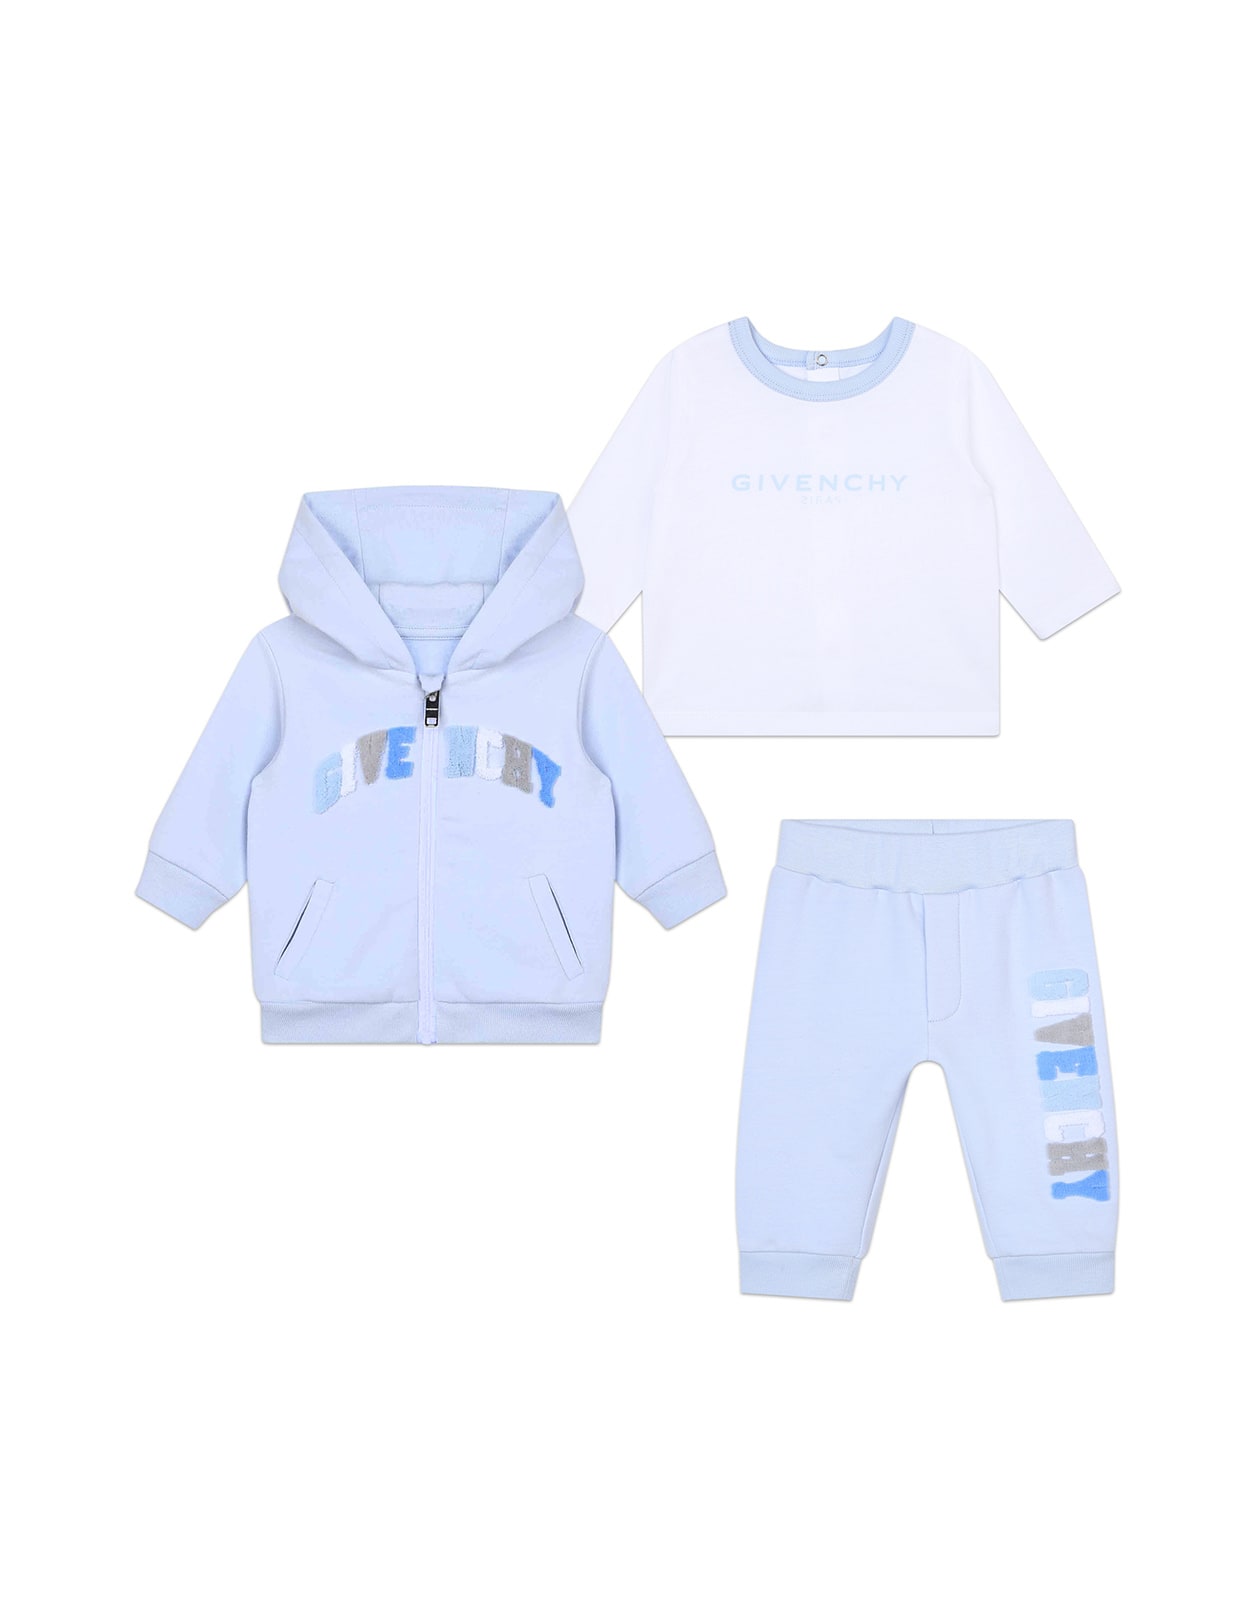 GIVENCHY LIGHT BLUE 3-PIECE SET WITH CONTRASTING TERRYCLOTH LOGO